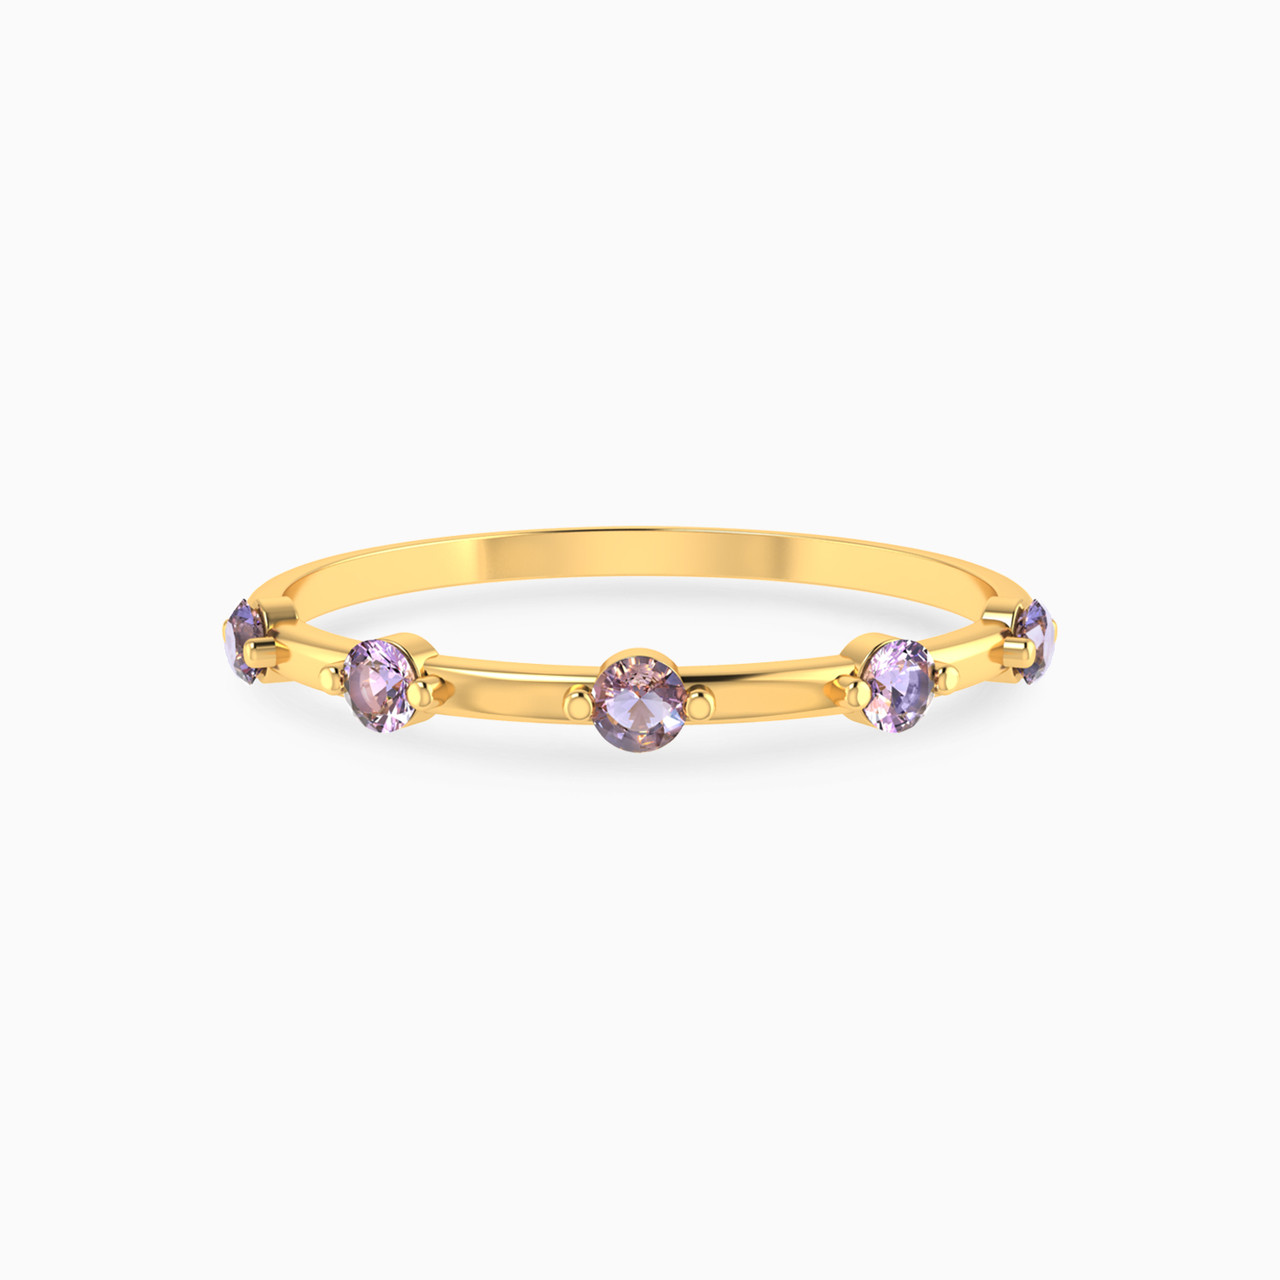 Round Shaped Colored Stones Statement Ring in 14K Gold